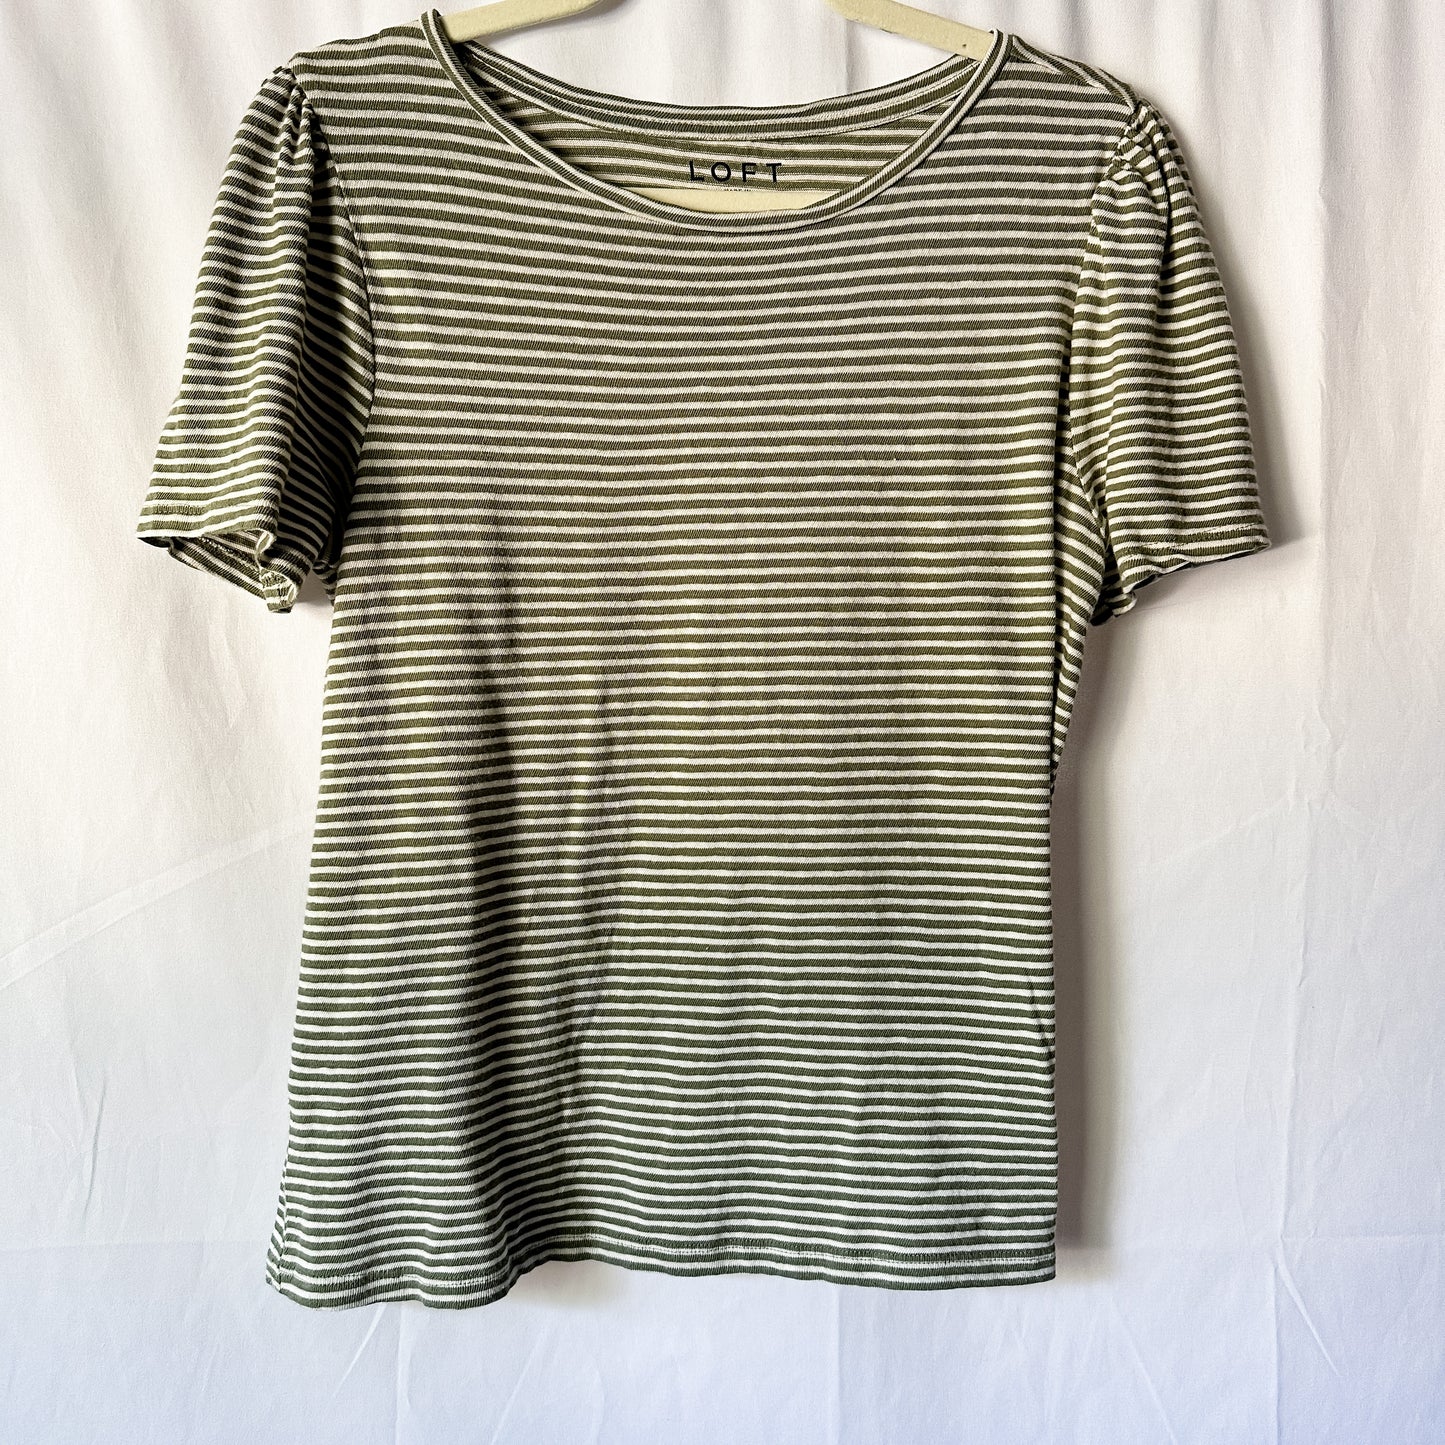 Olive Green Striped Knit Short Sleeve T-Shirt (fits S-M)